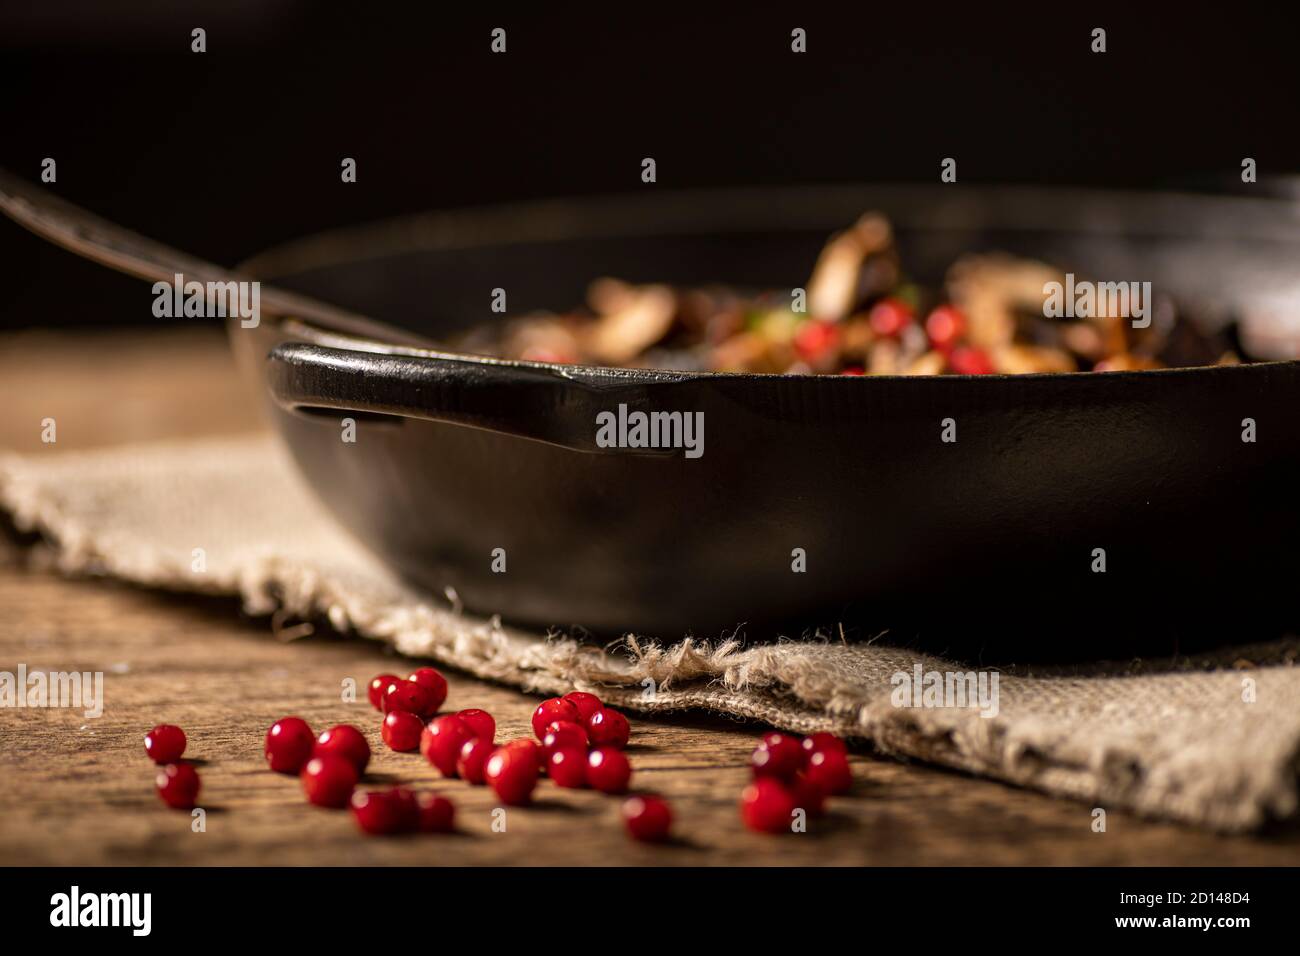 Bunch of lingonberries placed on a rustic wooden table. Black pot with food in background. Shallow depth of field. Stock Photo